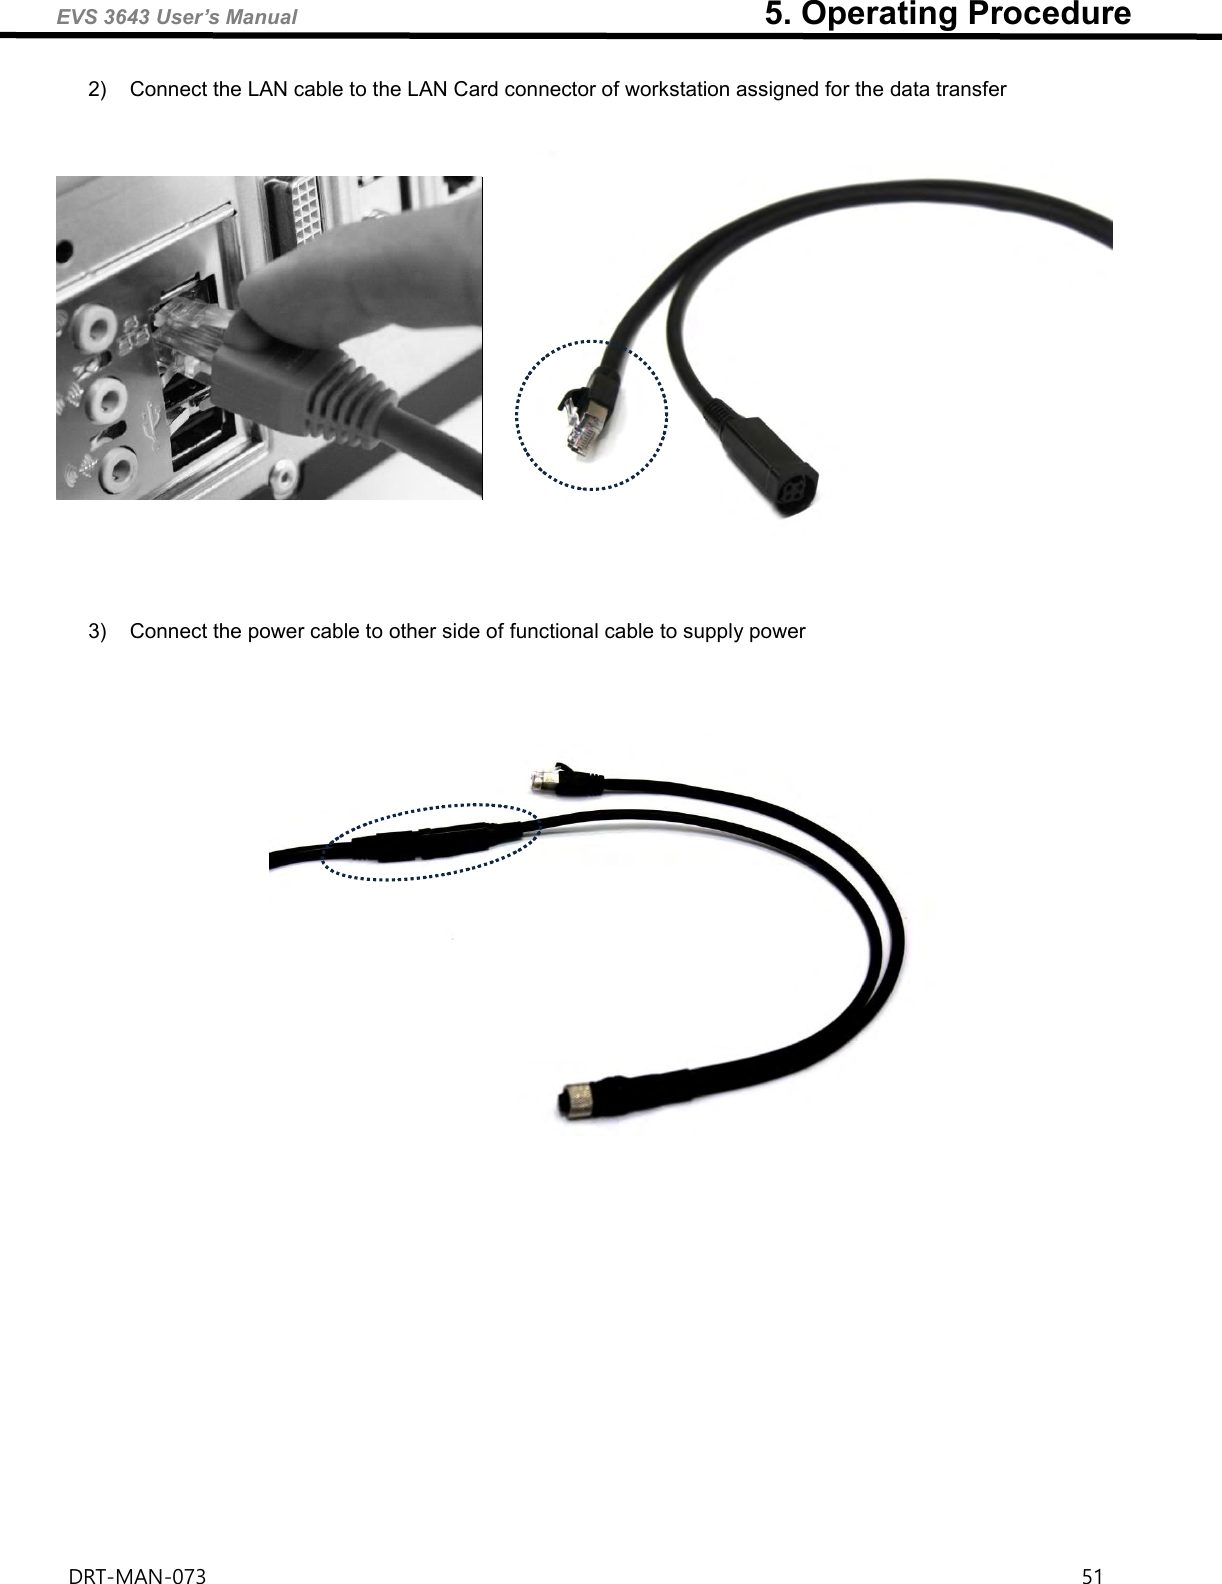 EVS 3643 User’s Manual                                                        5. Operating Procedure DRT-MAN-073                                                                                                                                                                51   2)  Connect the LAN cable to the LAN Card connector of workstation assigned for the data transfer           3)  Connect the power cable to other side of functional cable to supply power       